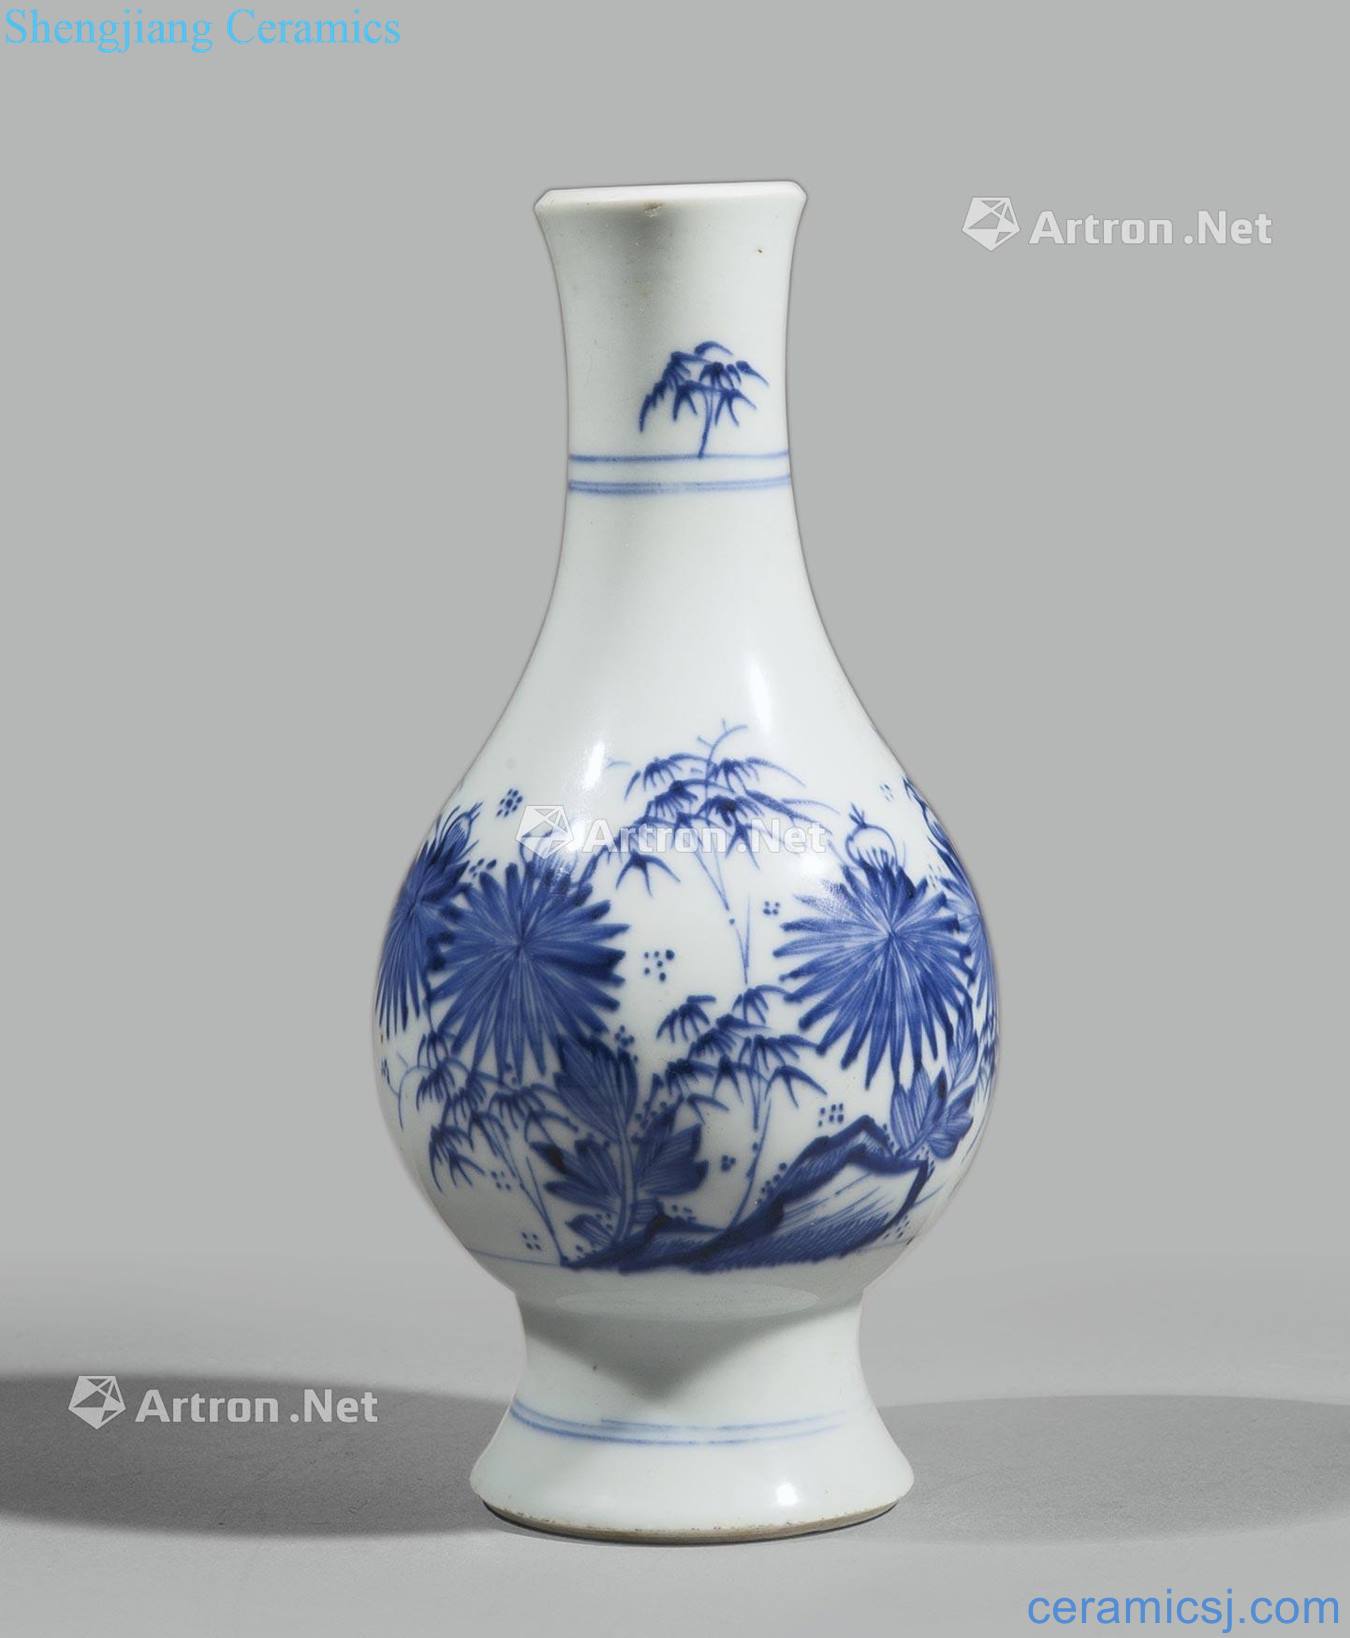 In the 17th century Blue and white bamboo chrysanthemum figure bottles